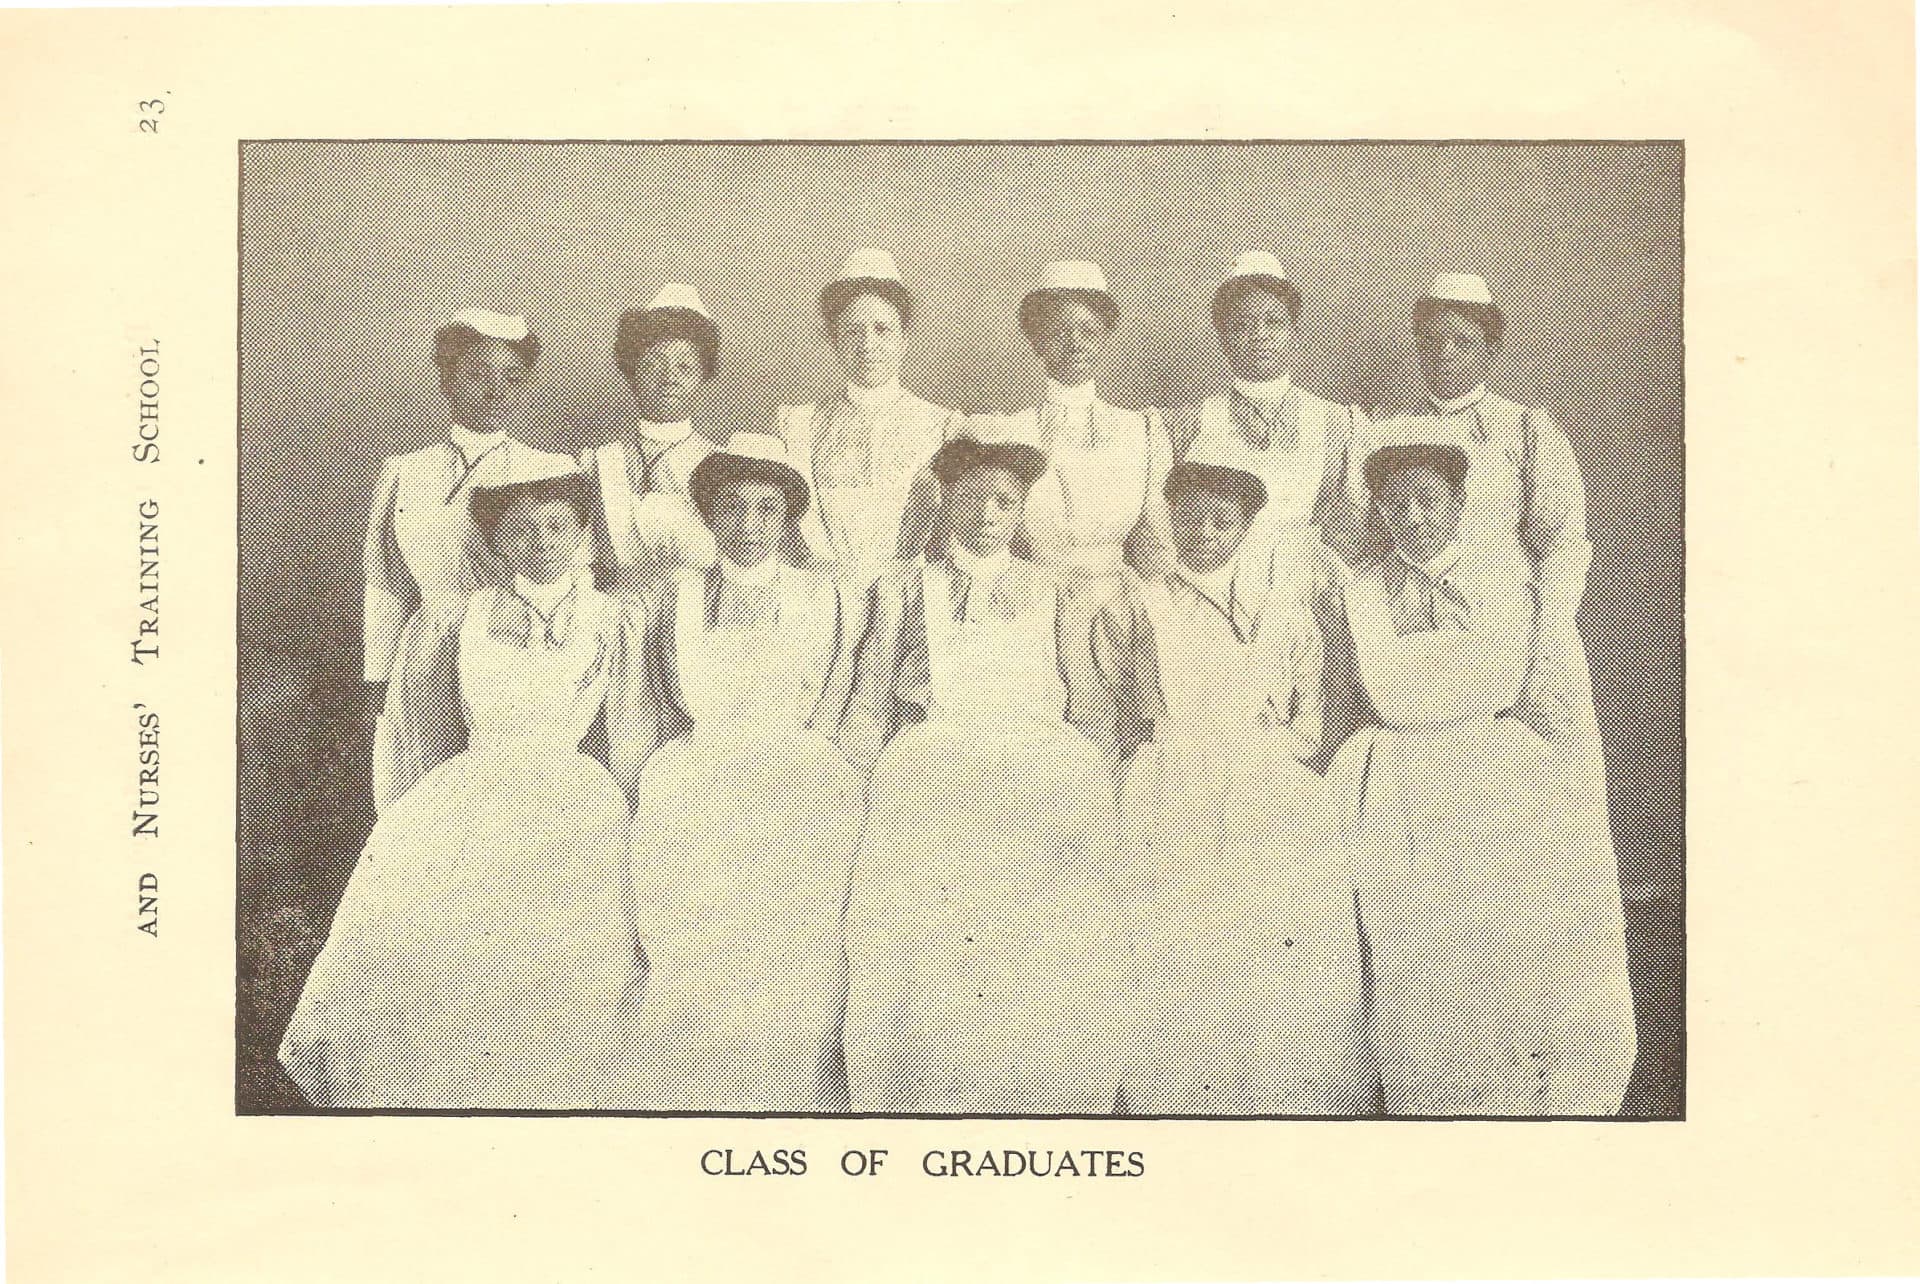 A graduating class of nurses from Plymouth Hospital and Nurses Training School, from a report printed in 1914. Boston, MA. (Courtesy Lisa Gordon)